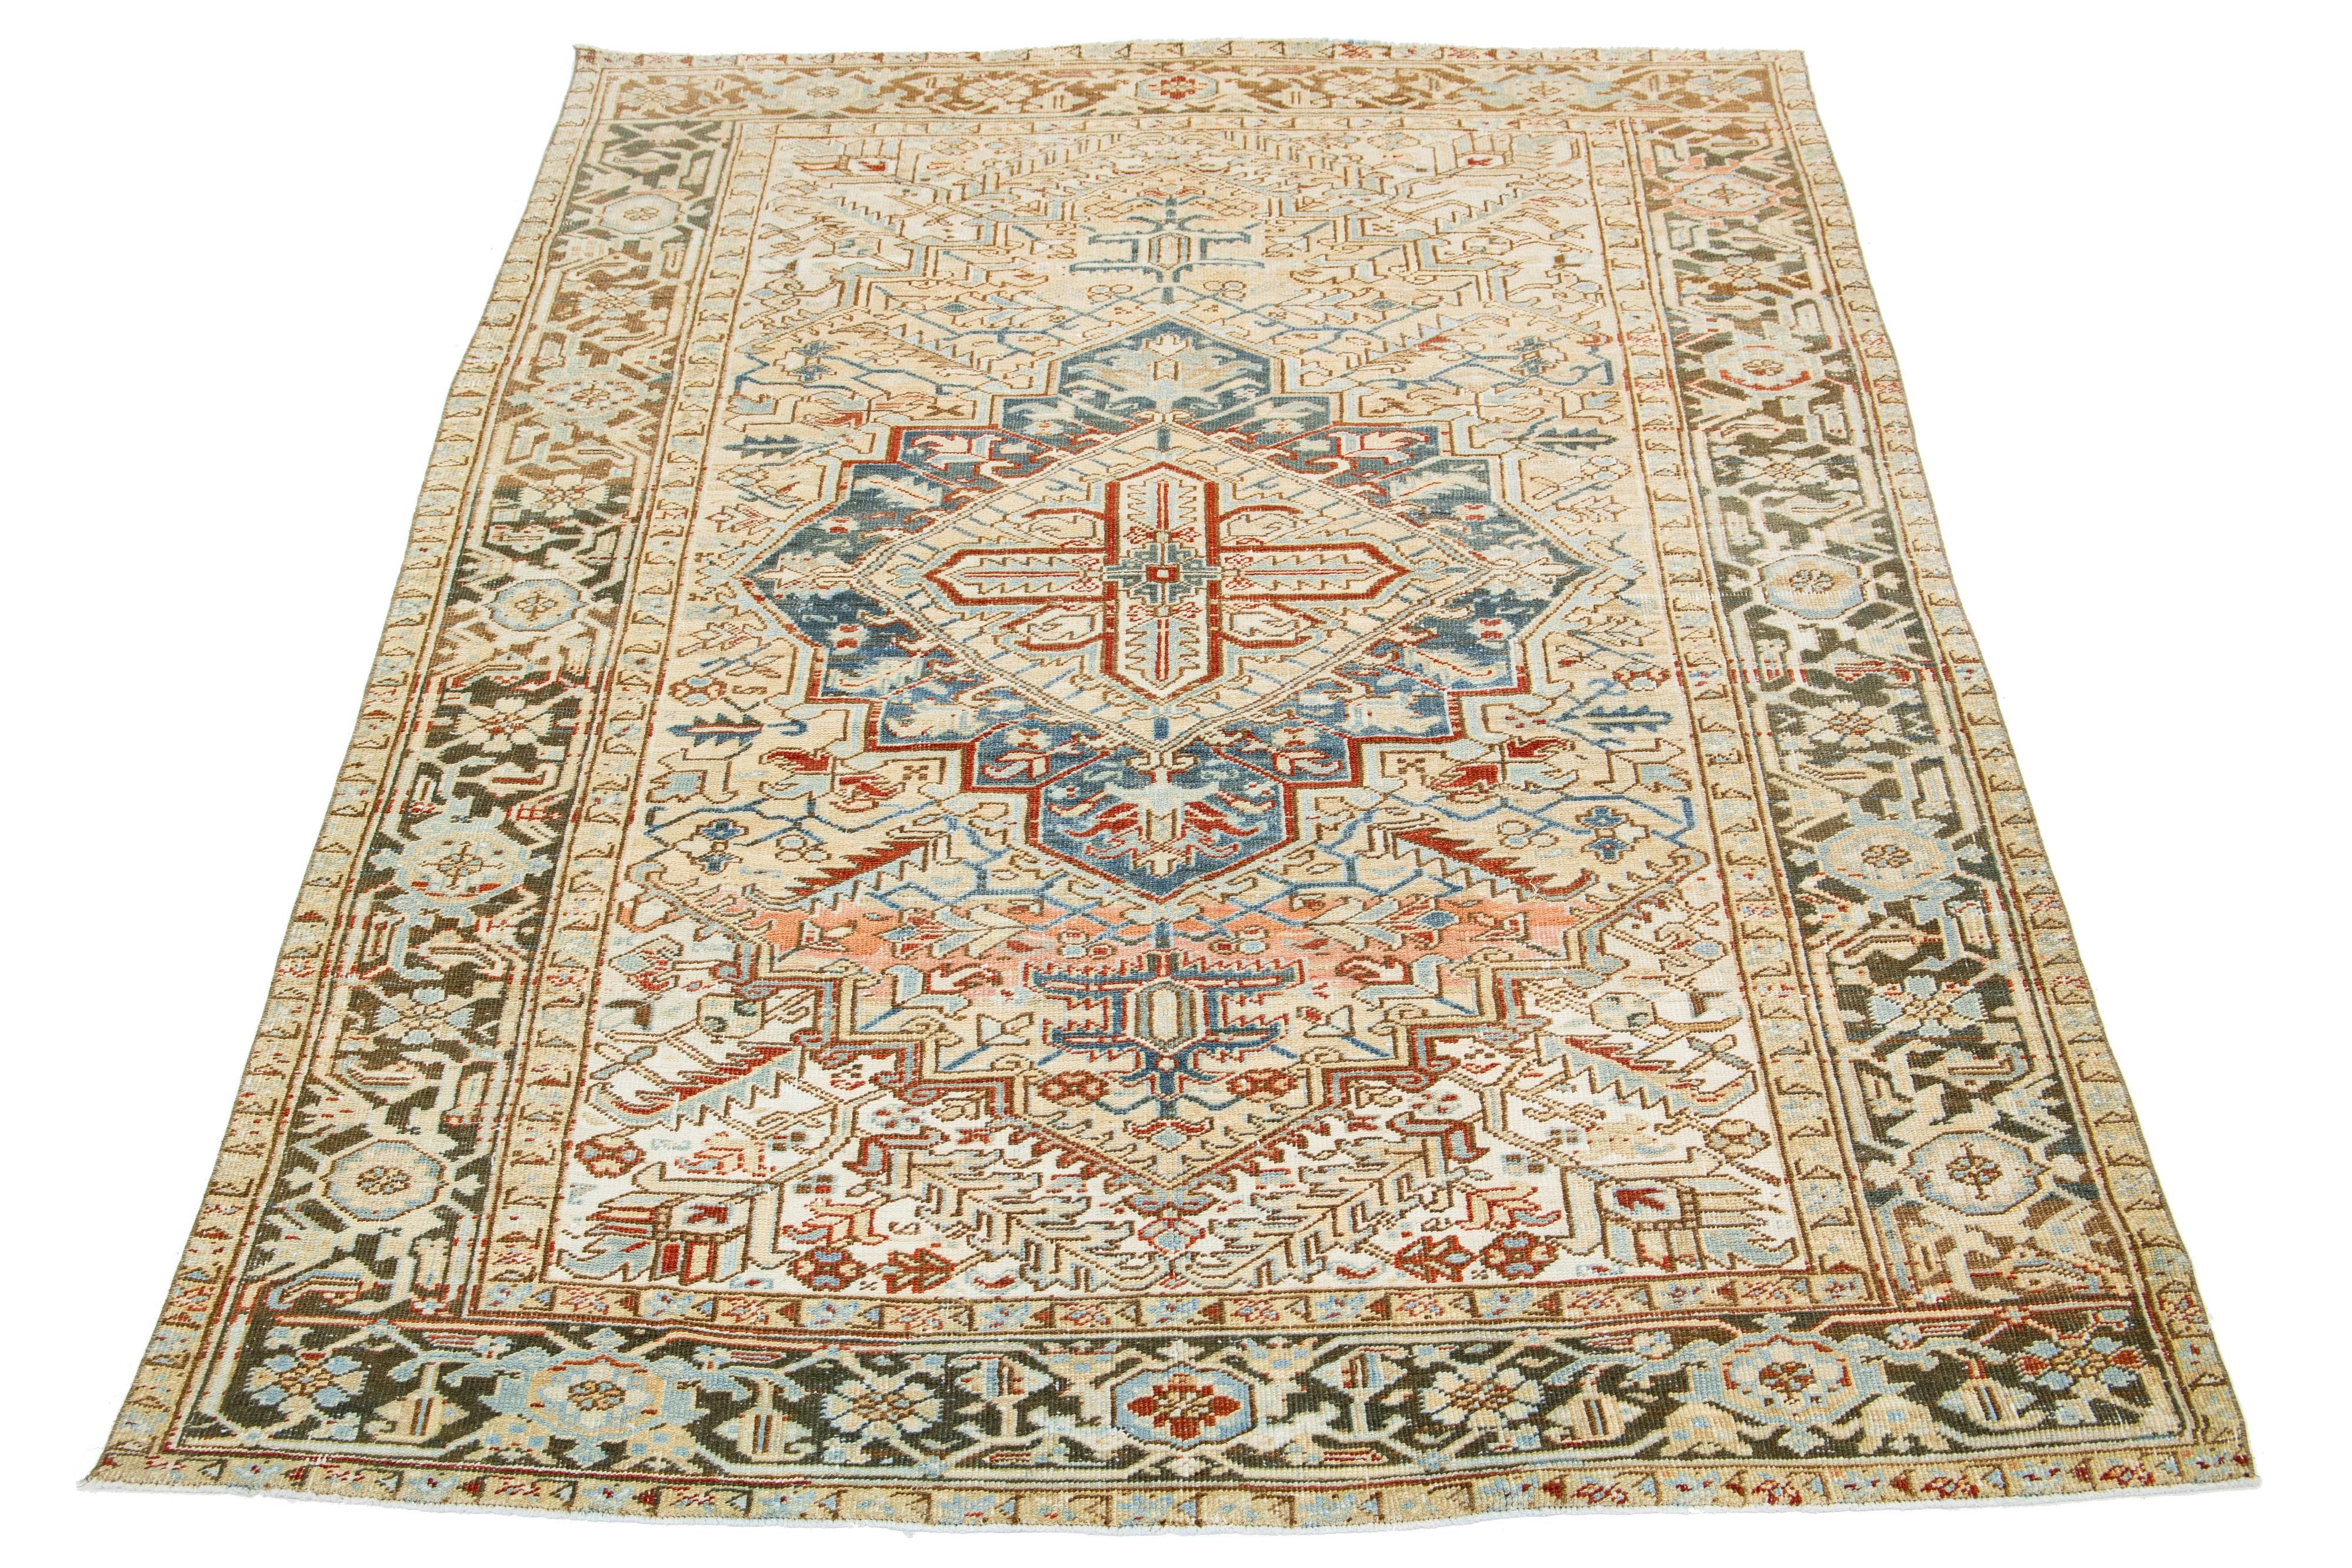 This antique Persian Heriz rug is made with hand-knotted wool. The beige field showcases a captivating allover pattern adorned with blue, rust, brown, and ivory shades.

This rug measures 6'2' x 8'9